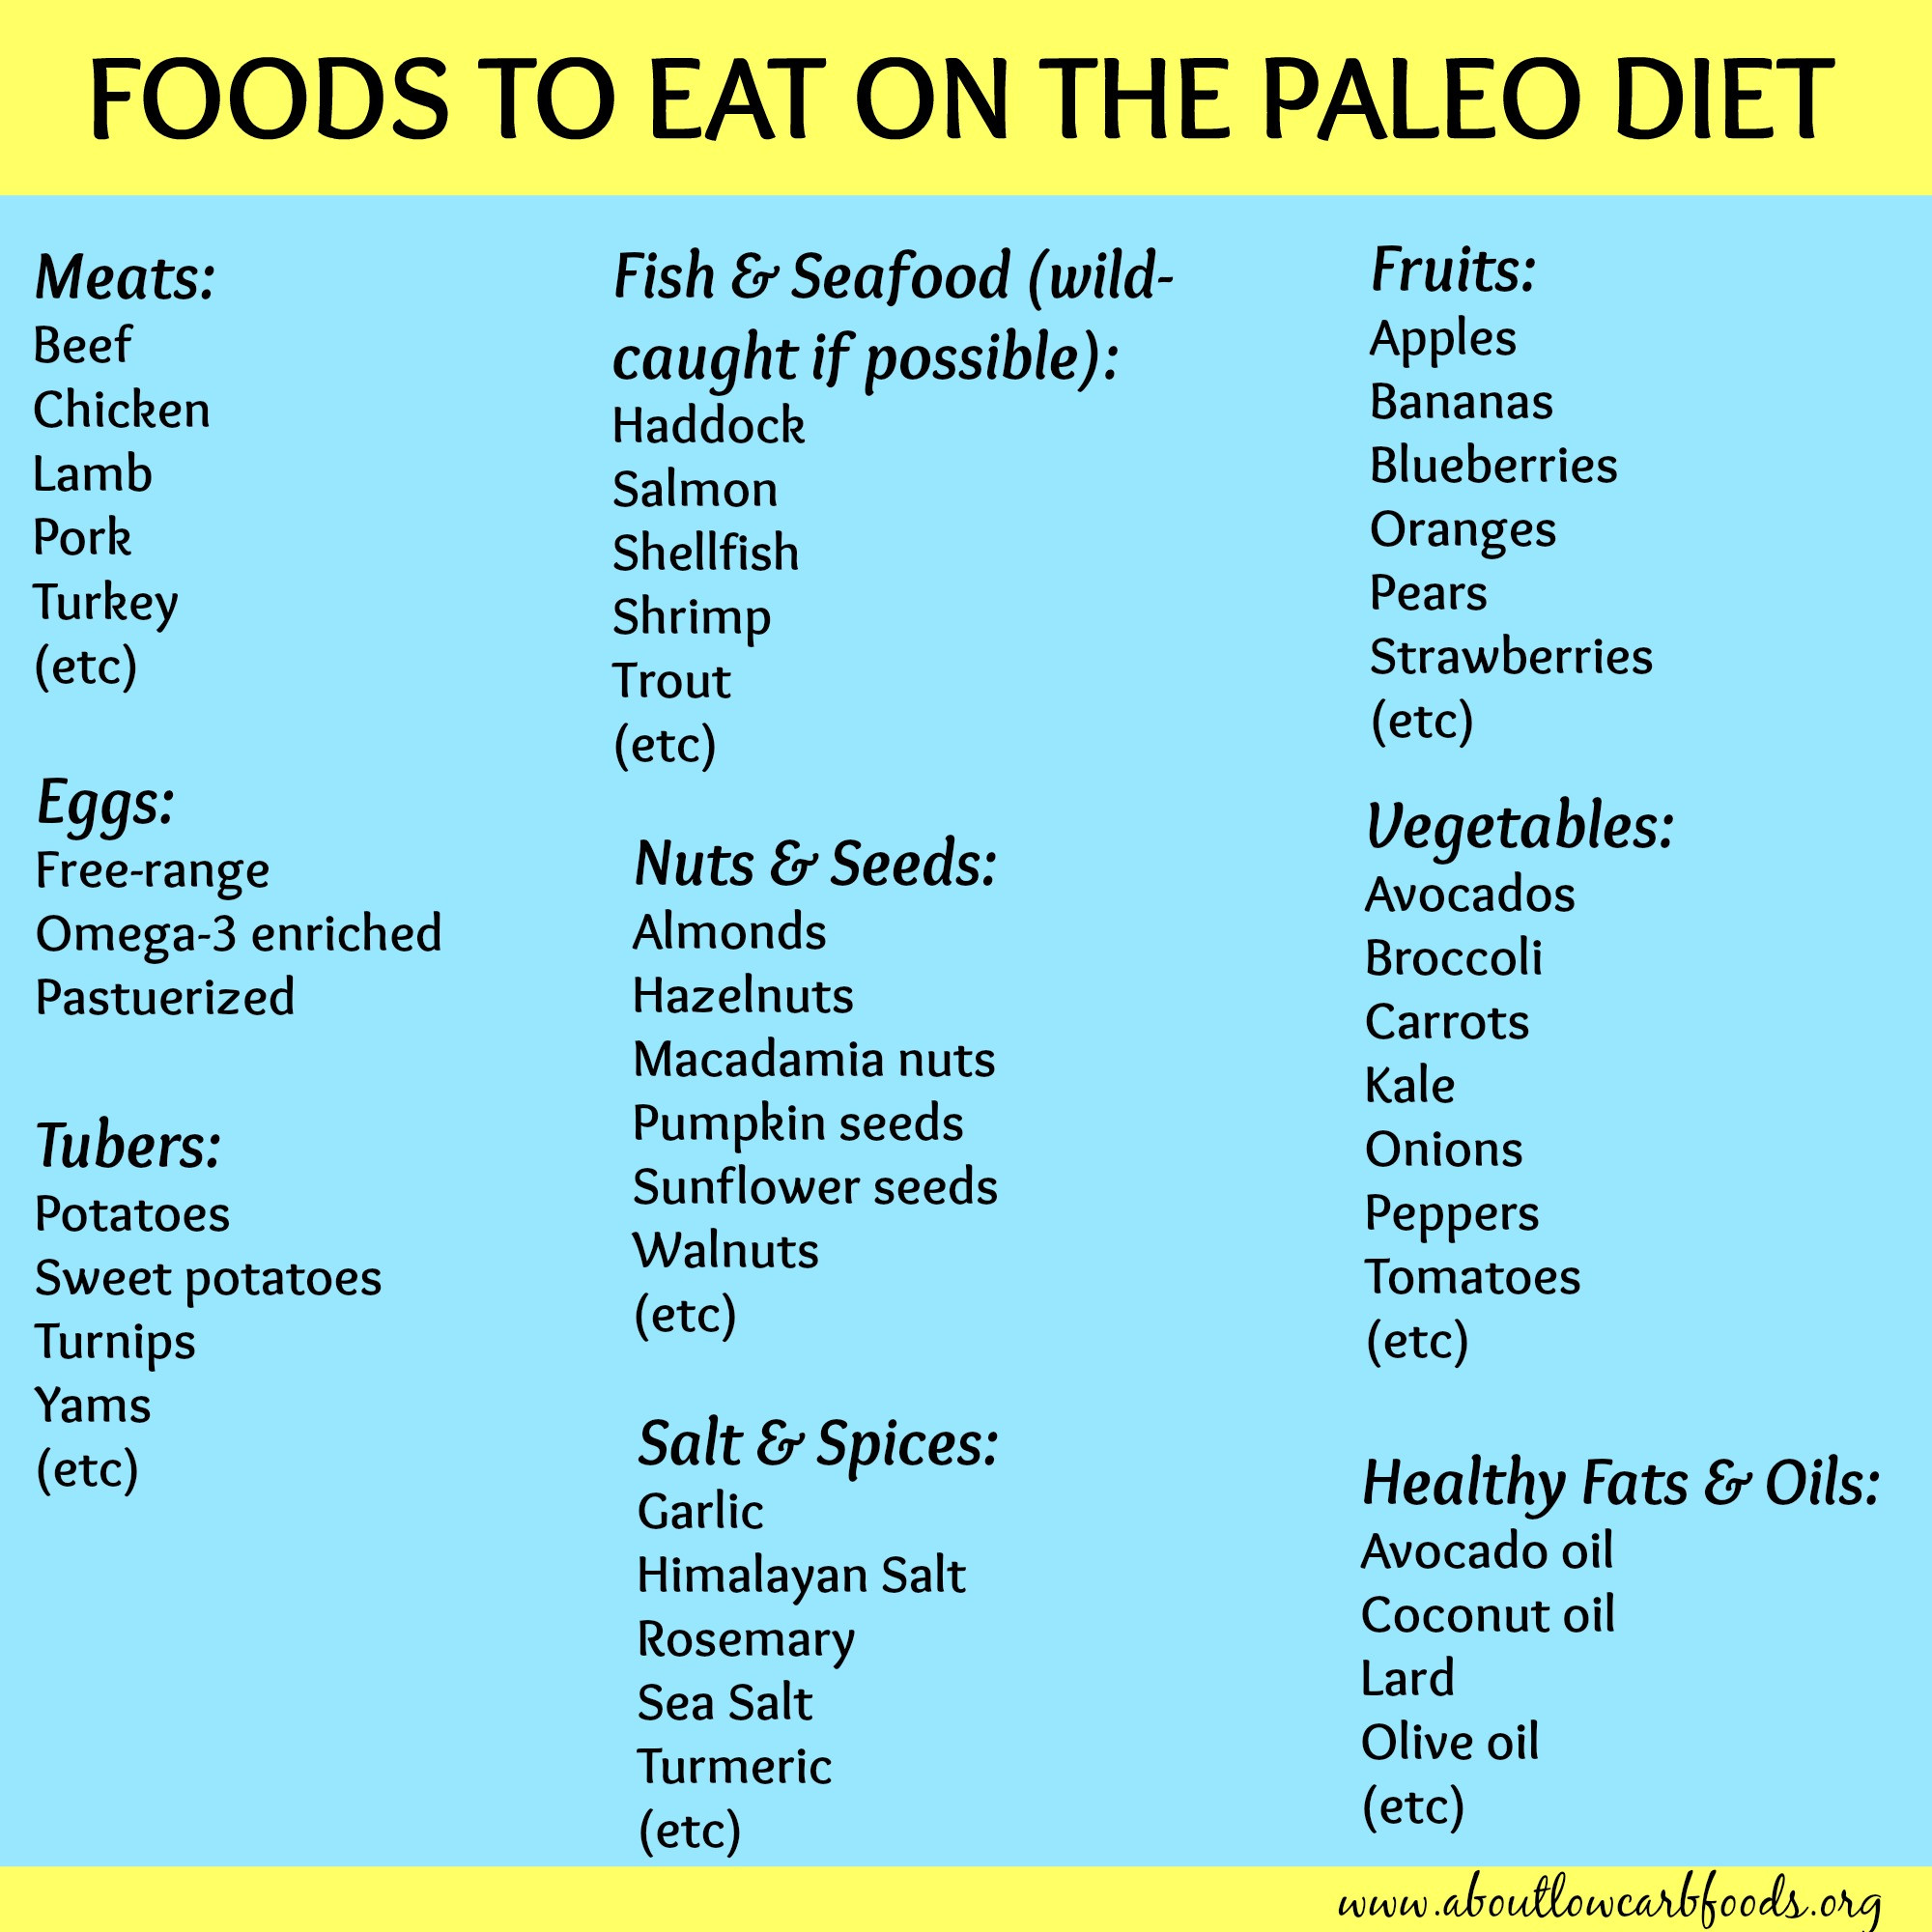 Free Paleo Diet
 Paleo Diet Meal Plan Why It’s So Popular About Low Carb